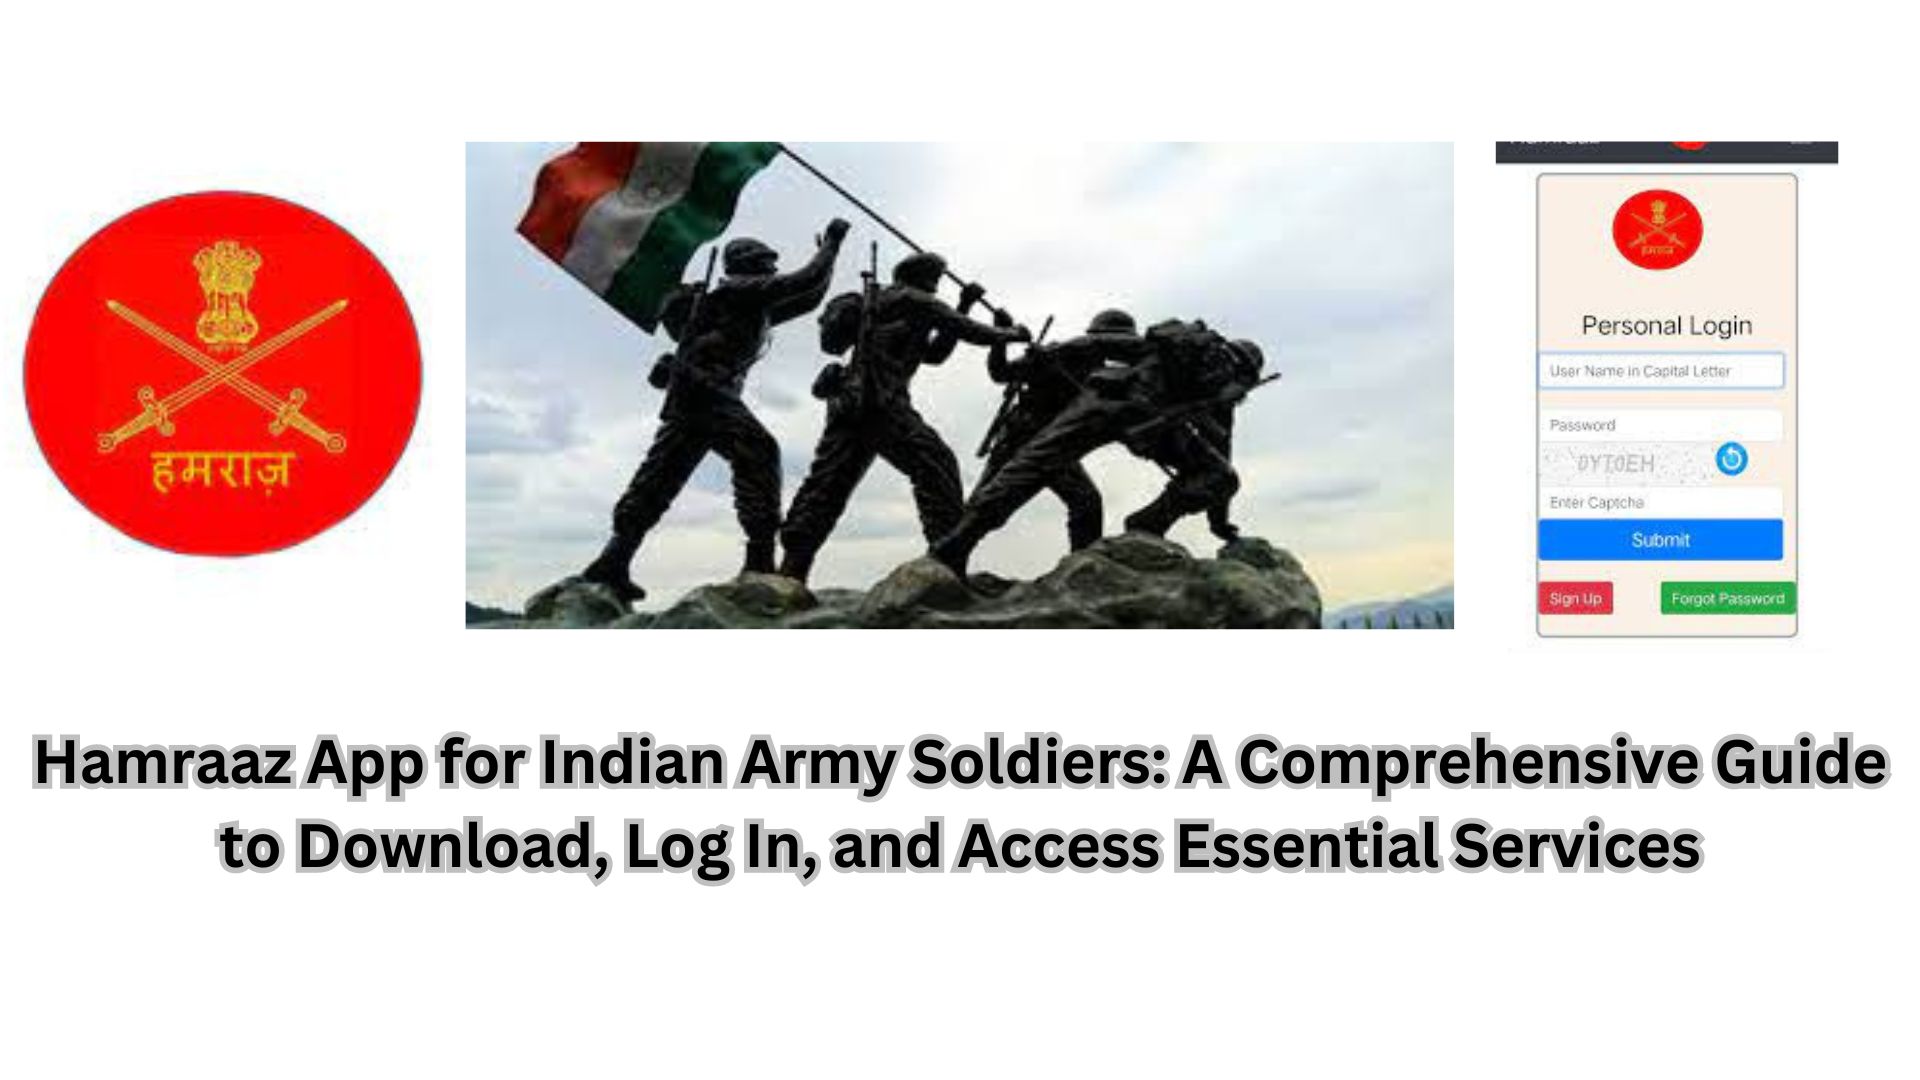 Hamraaz App for Indian Army Soldiers: A Comprehensive Guide to Download, Log In, and Access Essential Services